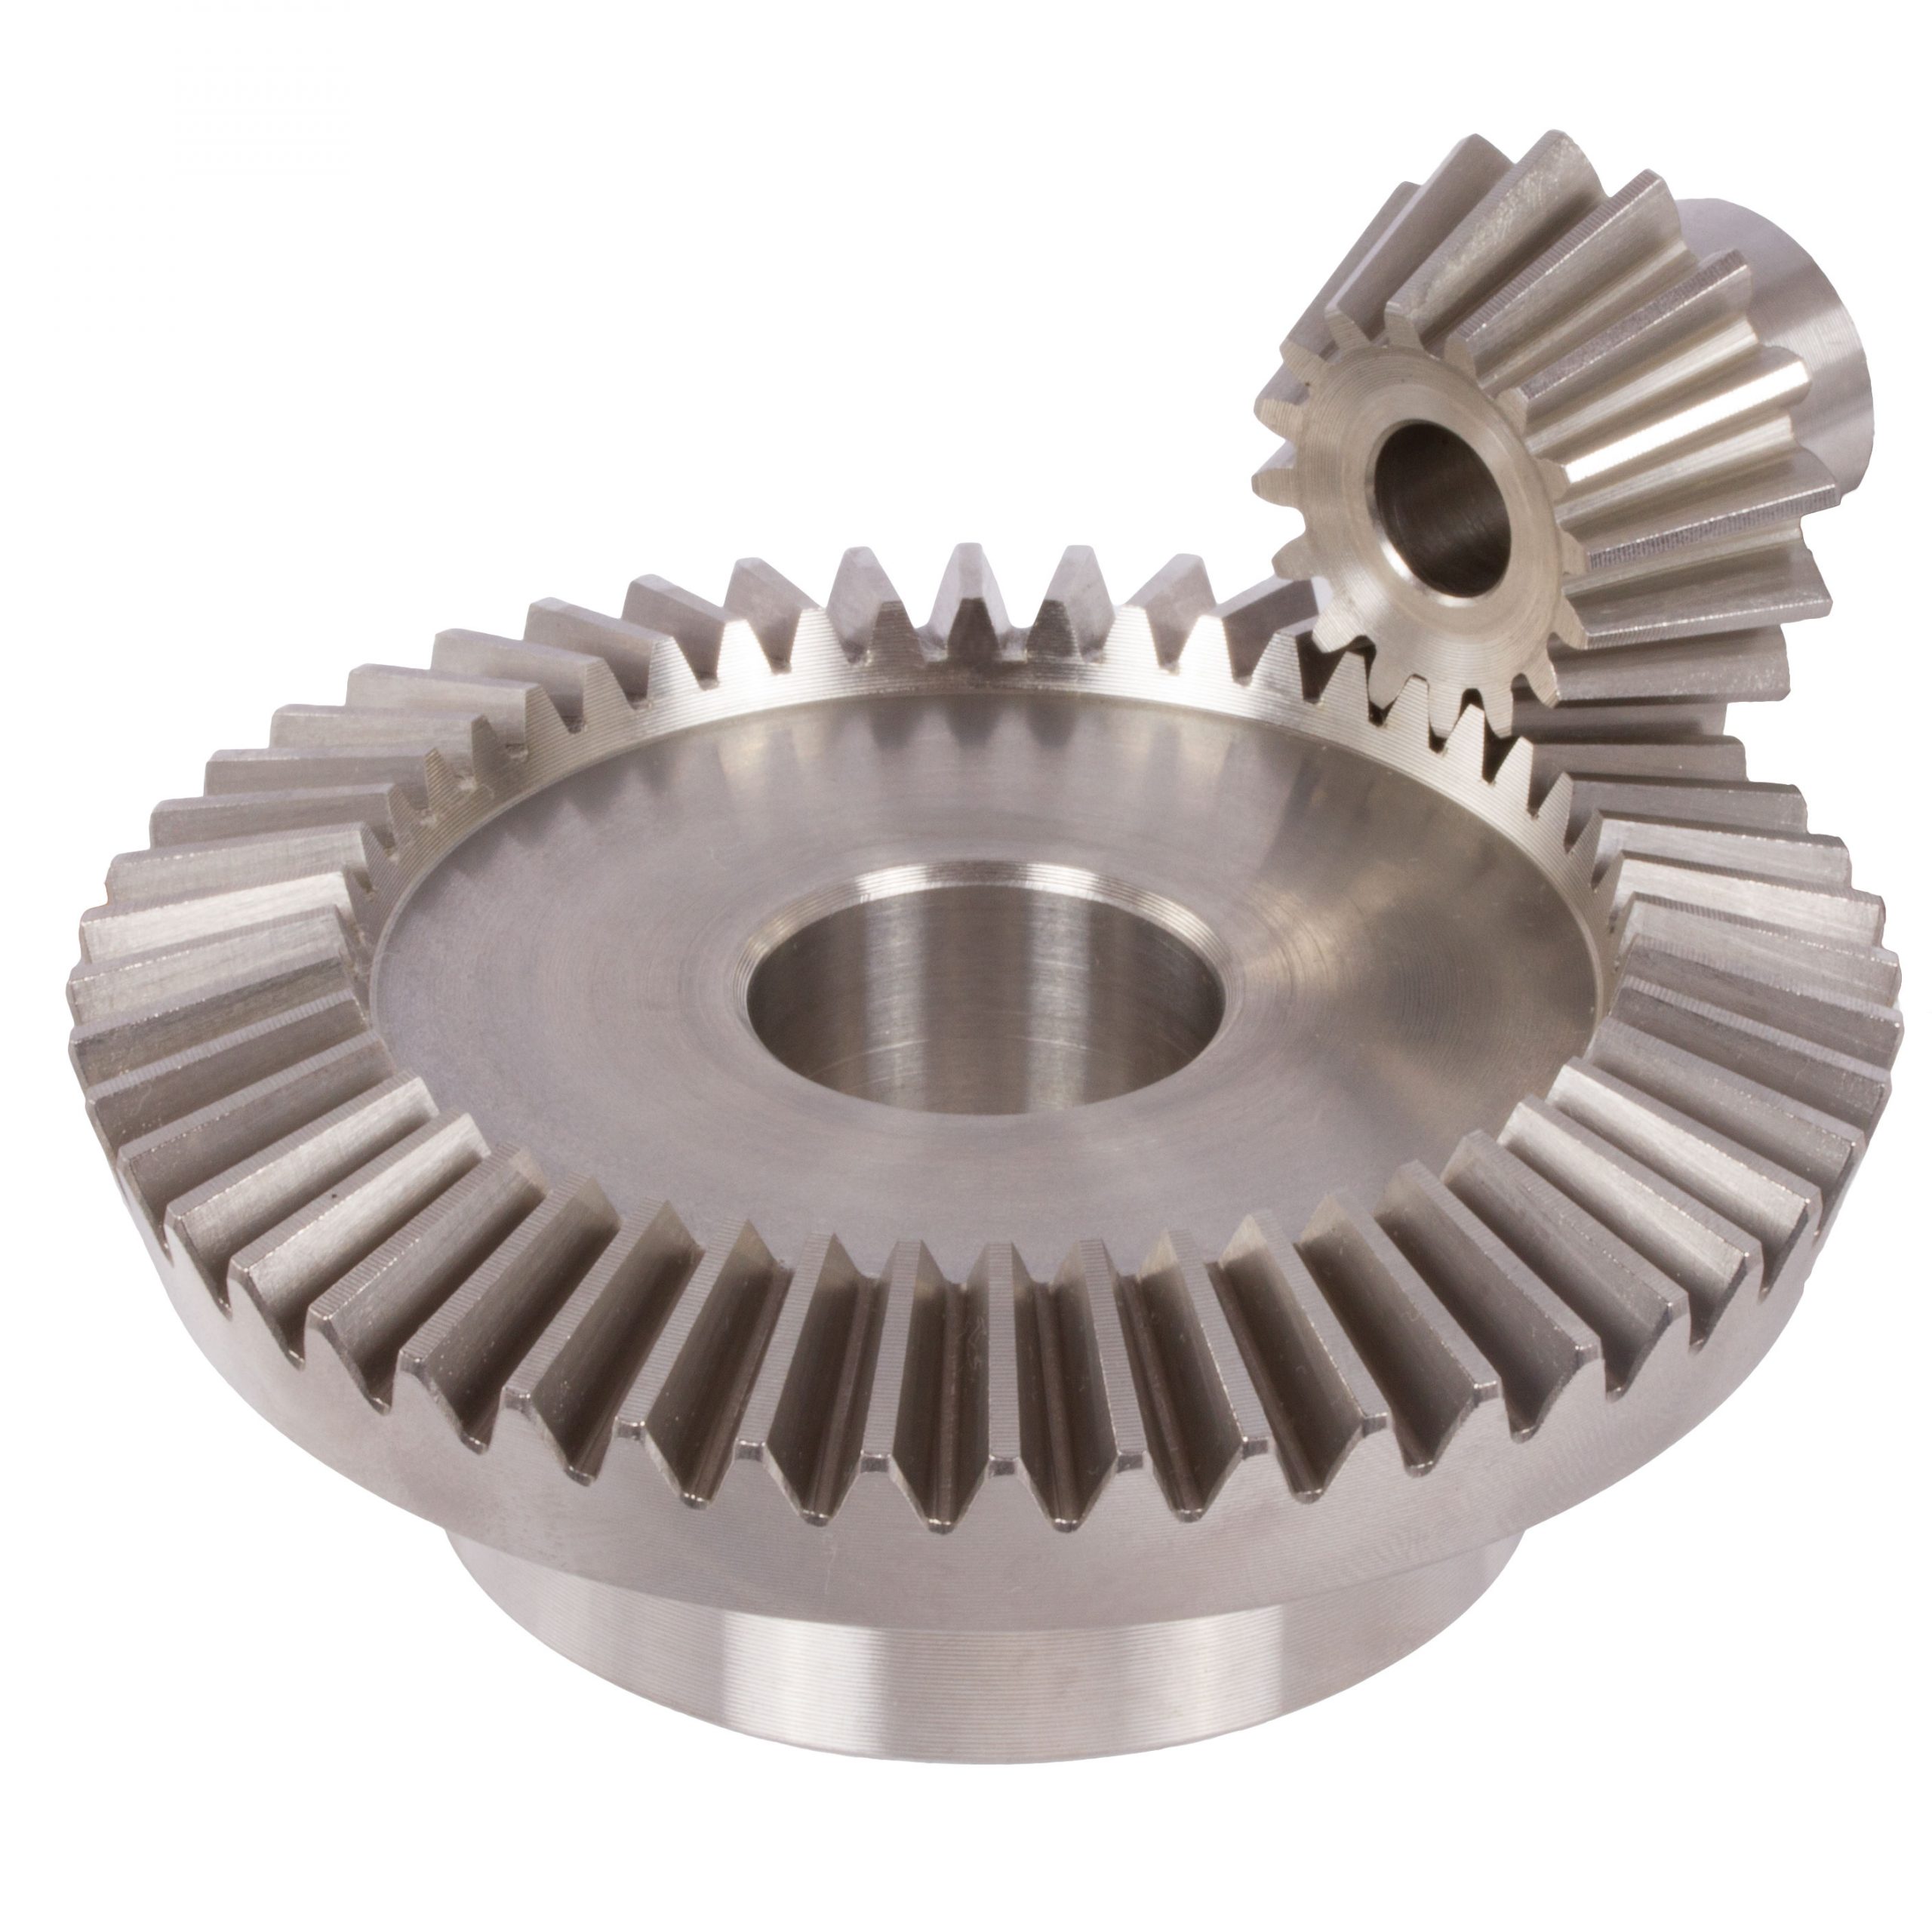 Bevel gear made of stainless steel 1.4305 module 3 30 teeth i=2:1 